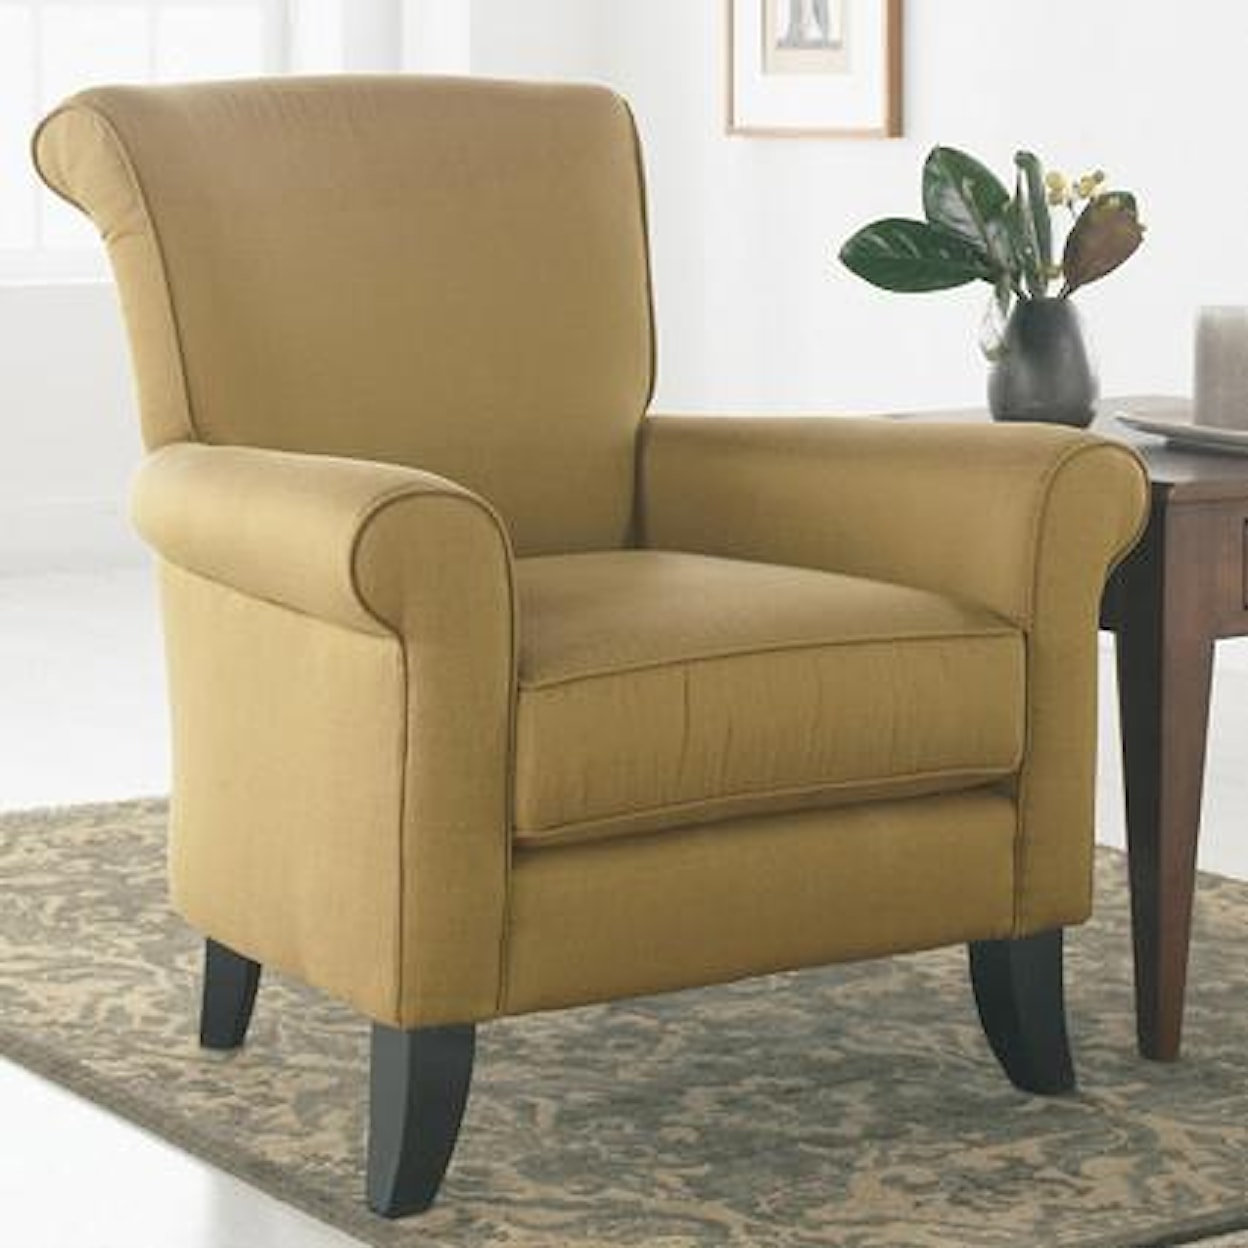 Decor-Rest Upholstered Accents Upholstered Chair